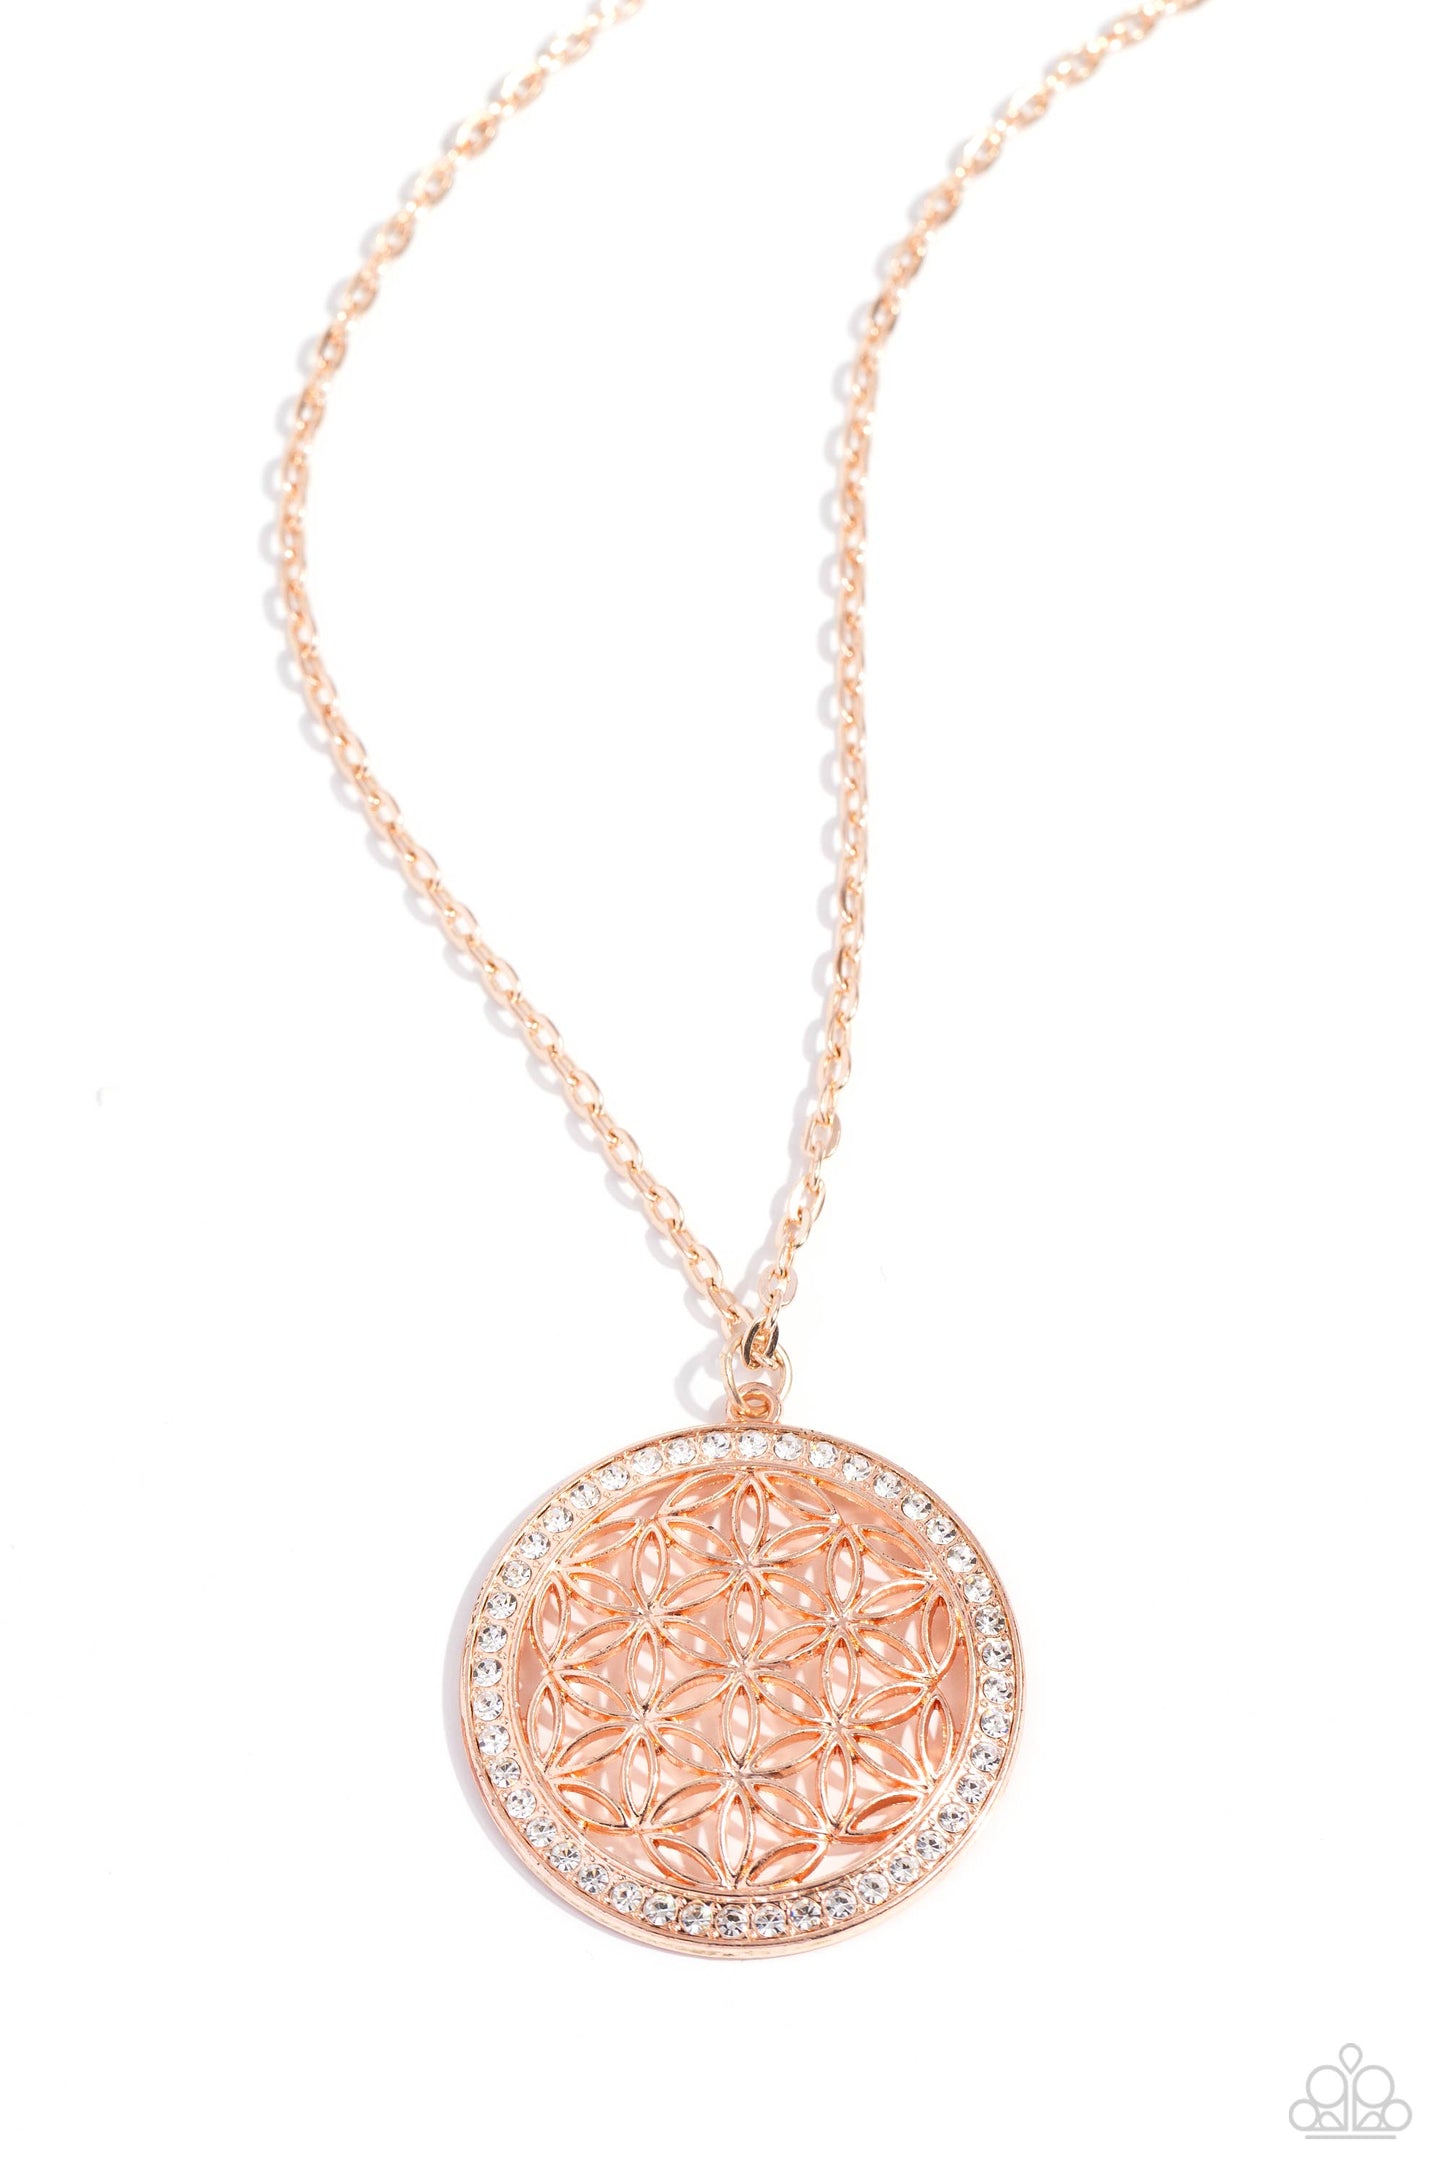 Tearoom Twinkle Paparazzi Accessories Necklace with Earrings Rose Gold